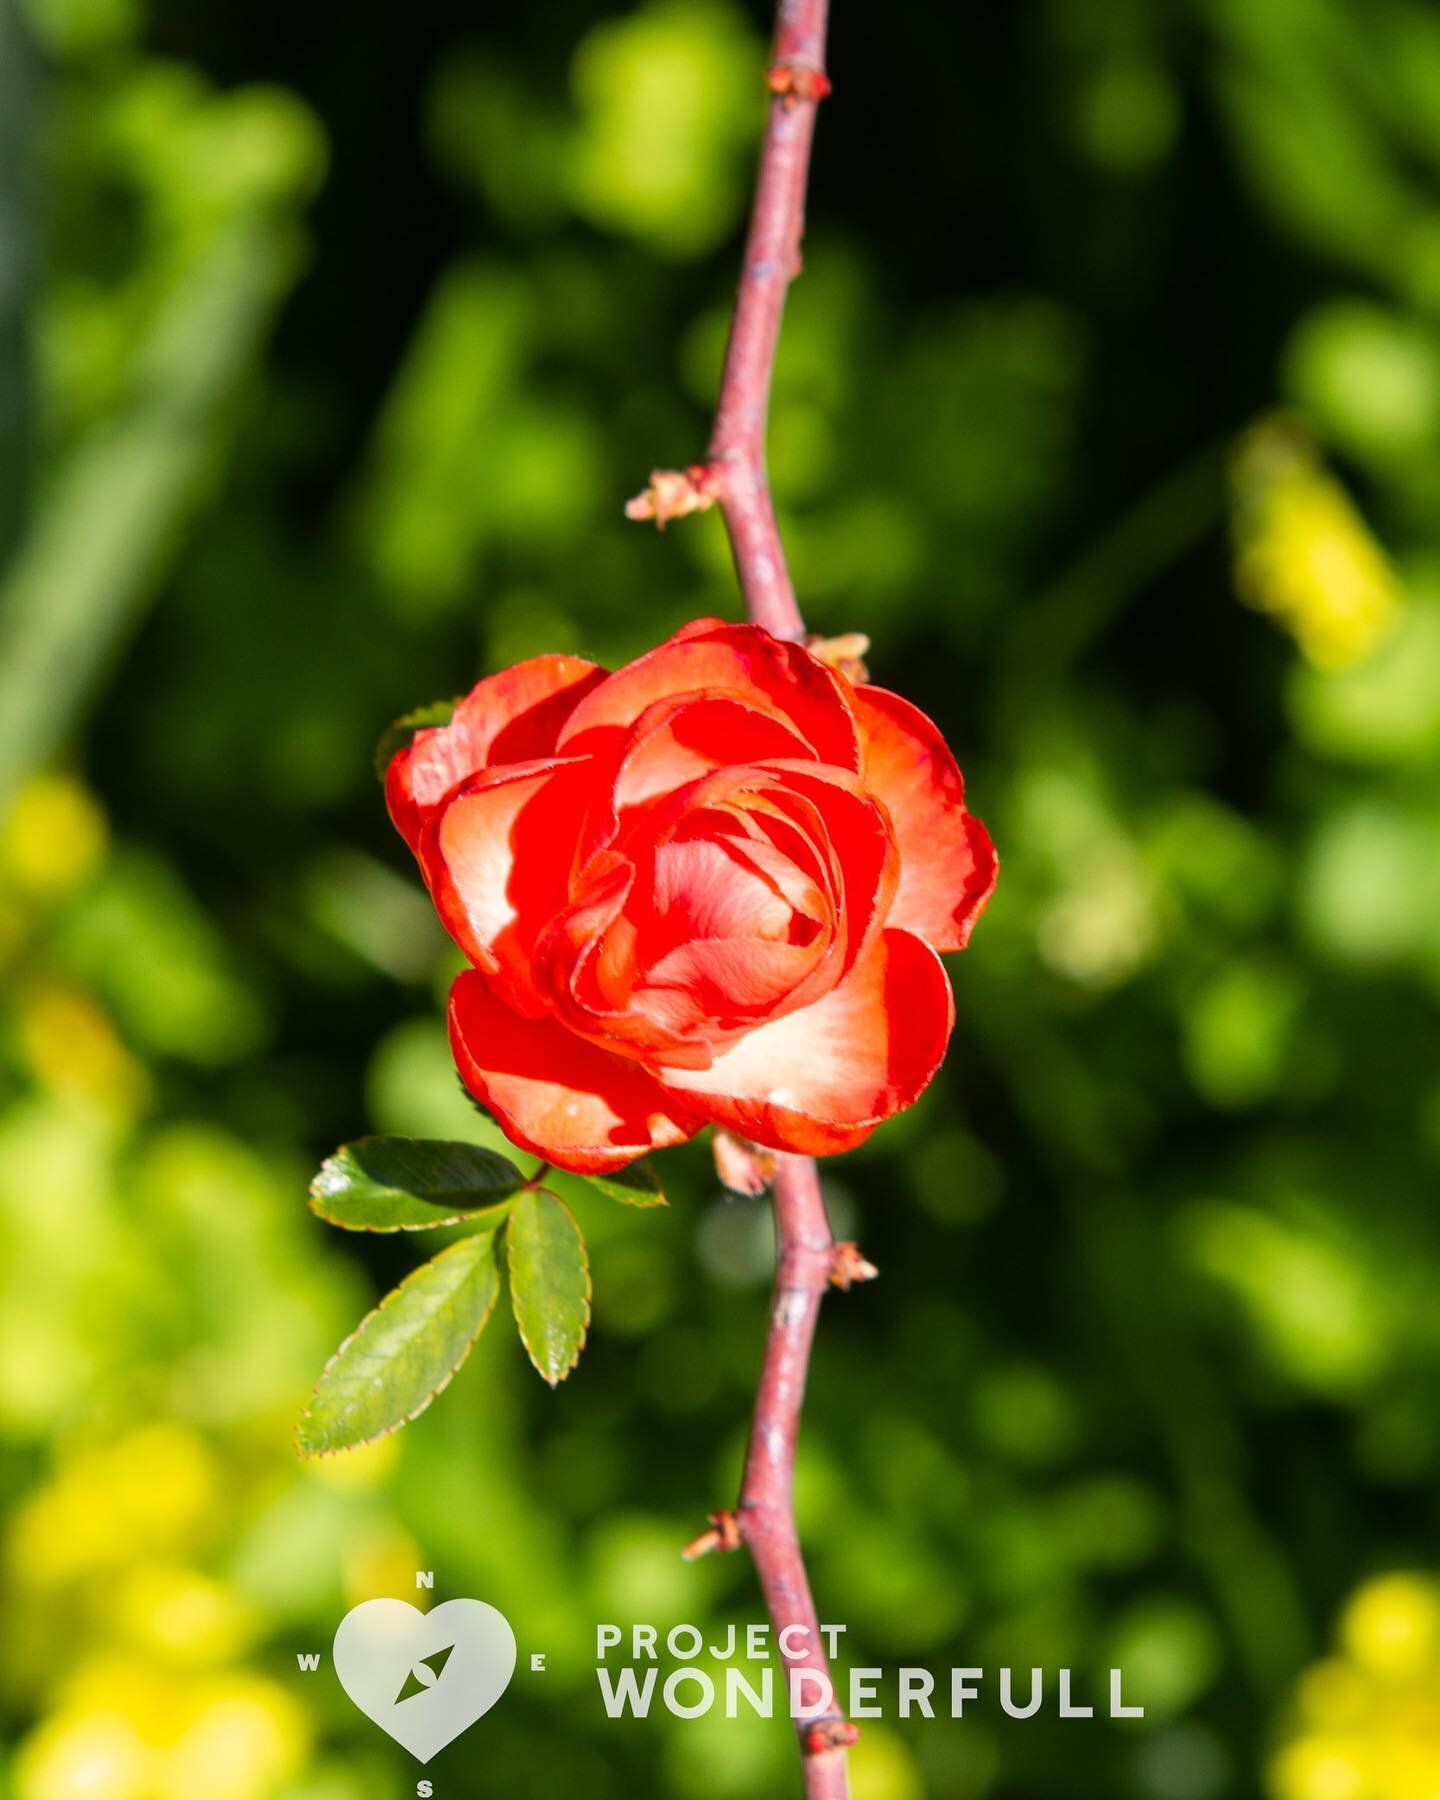 Here&rsquo;s a beautiful rose in honor of Project WonderFULL&rsquo;s 4th Birthday! It&rsquo;s been a wonderFULL 4 years&hellip; looking forward to many more with all of you! 

#beautyheals 

Today&rsquo;s WonderFULL: Birthday Beauty Rose. 

(Oakland,